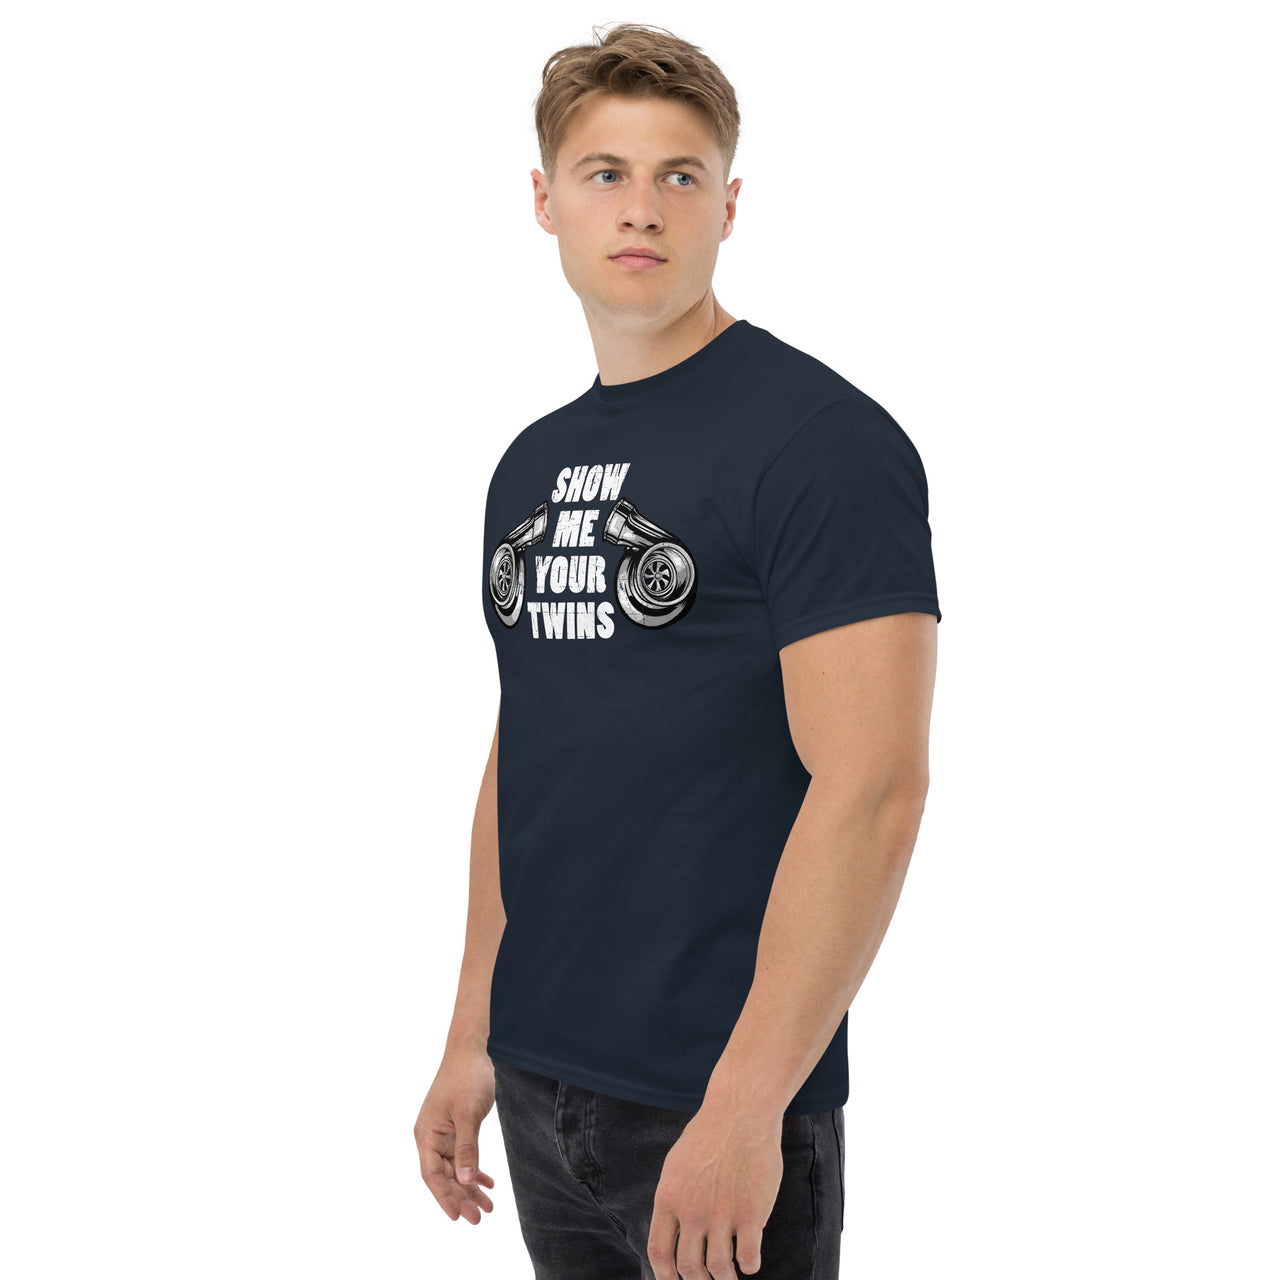 Show Me Your Twins Funny Turbo T-Shirt modeled in navy